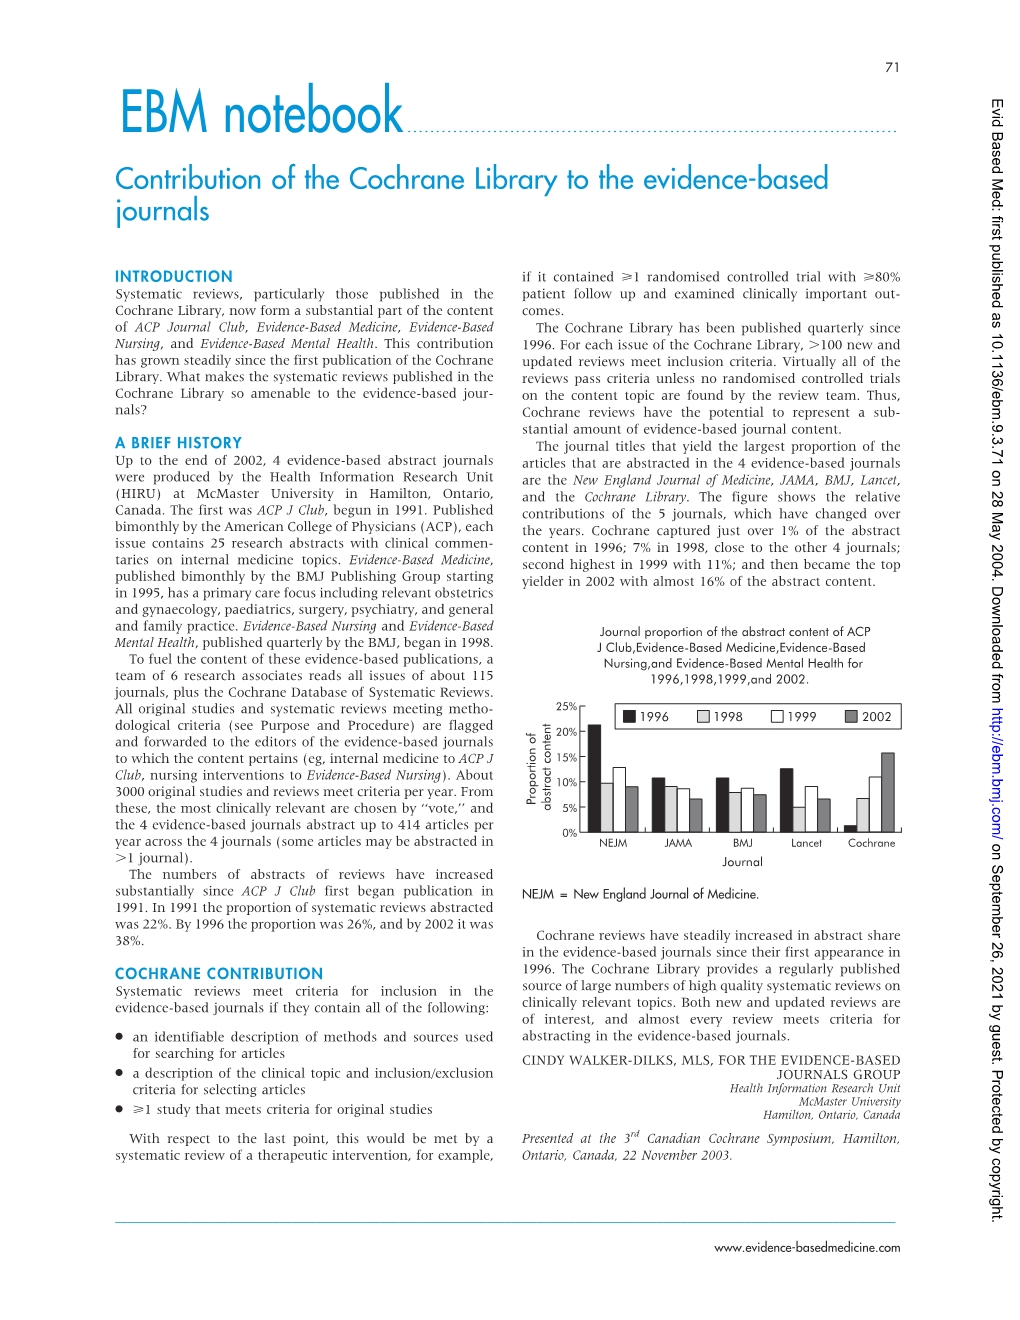 Contribution of the Cochrane Library to the Evidence-Based Journals